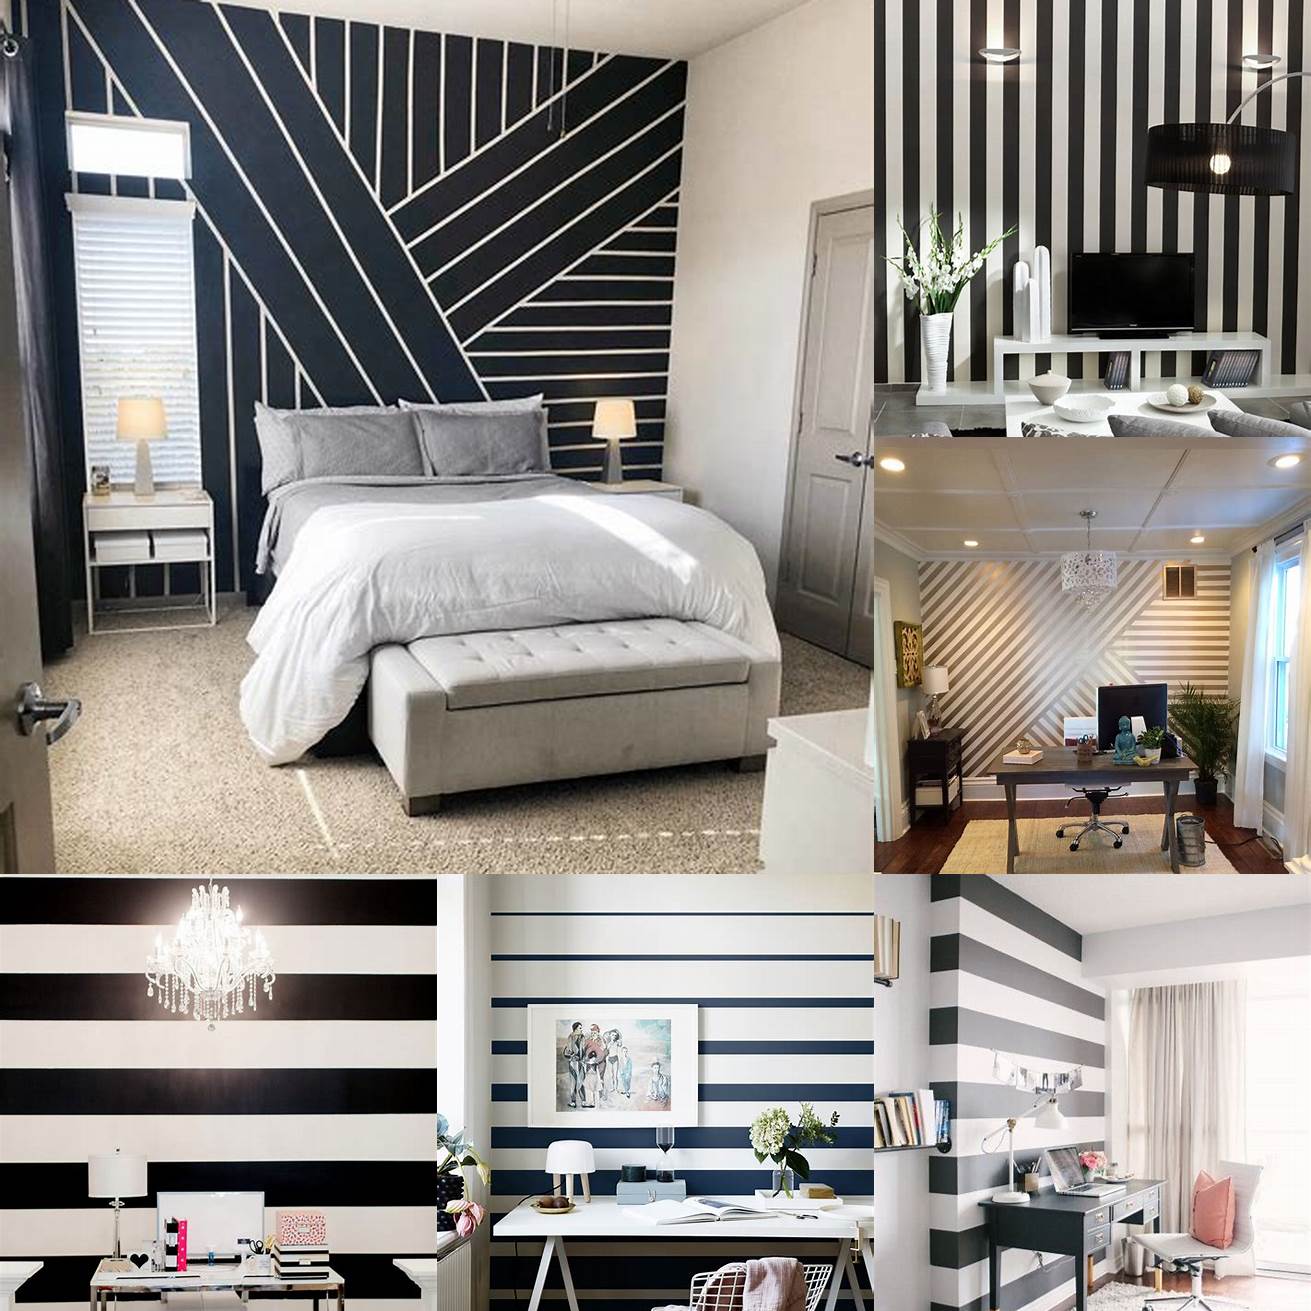 Beige walls with a bold black and white striped accent wall